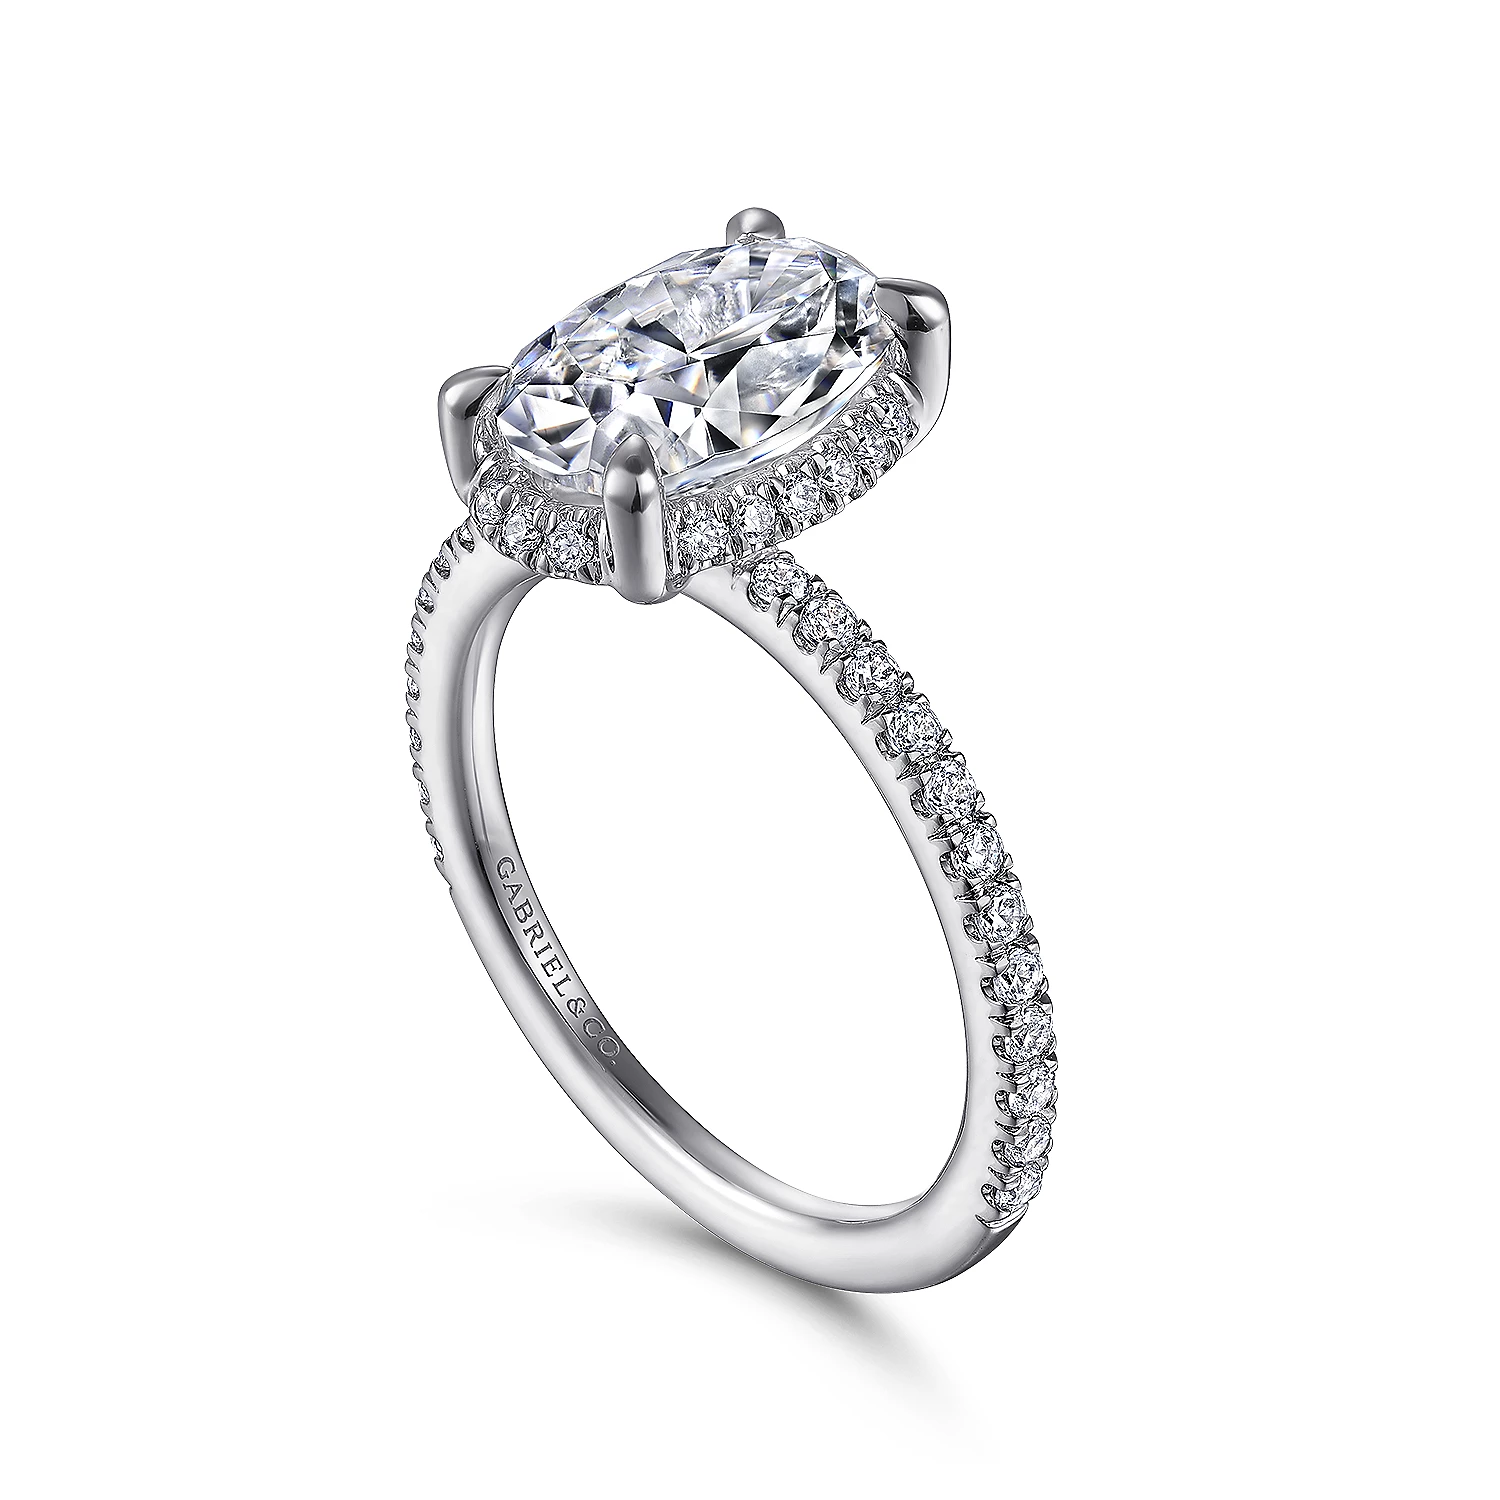 Hart 14K White Gold Hidden Halo Diamond Engagement Ring - Paul's Jewelry-Jewelry is Personal.